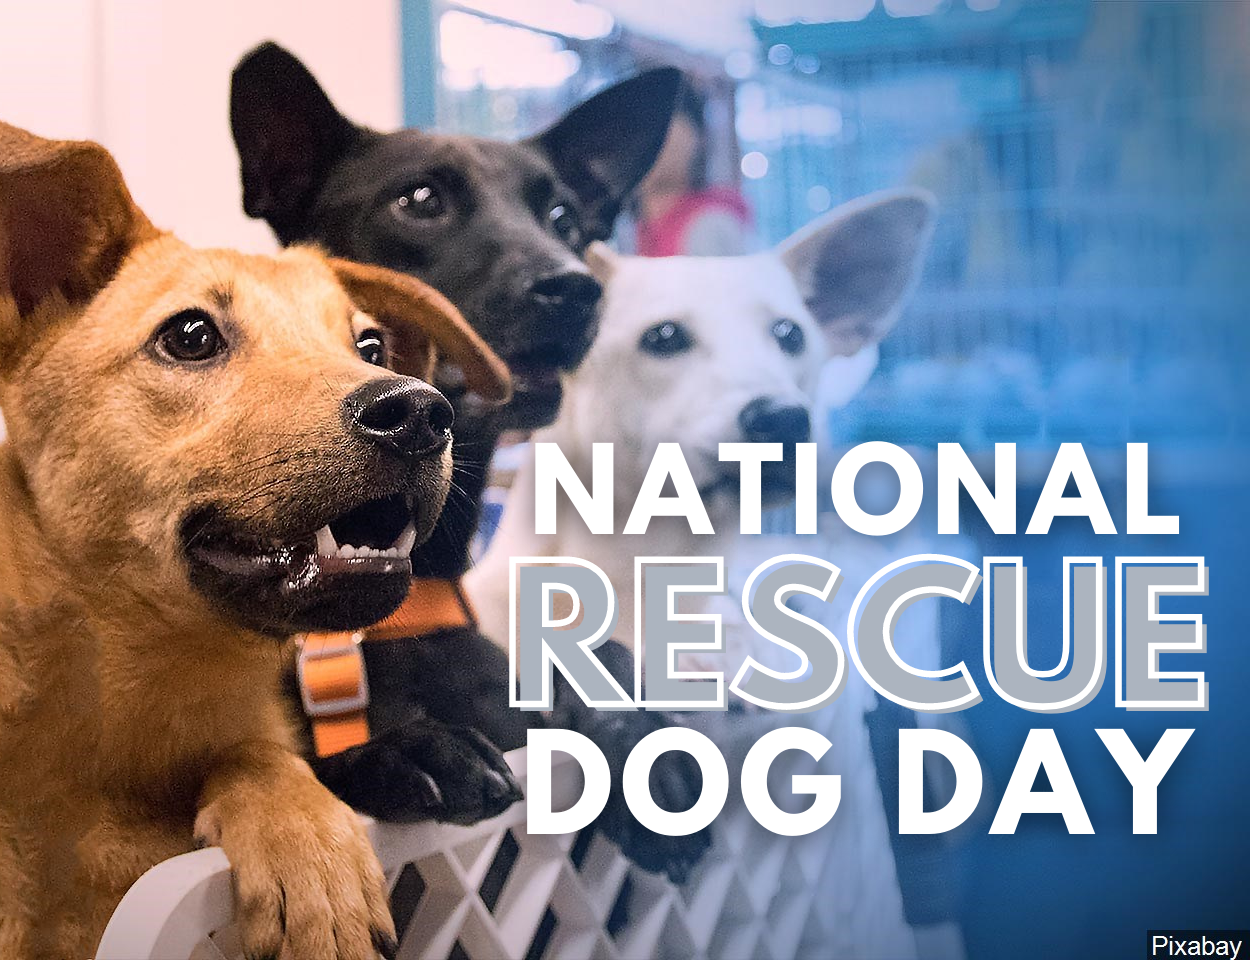 GALLERY It's National Rescue Dog Day!